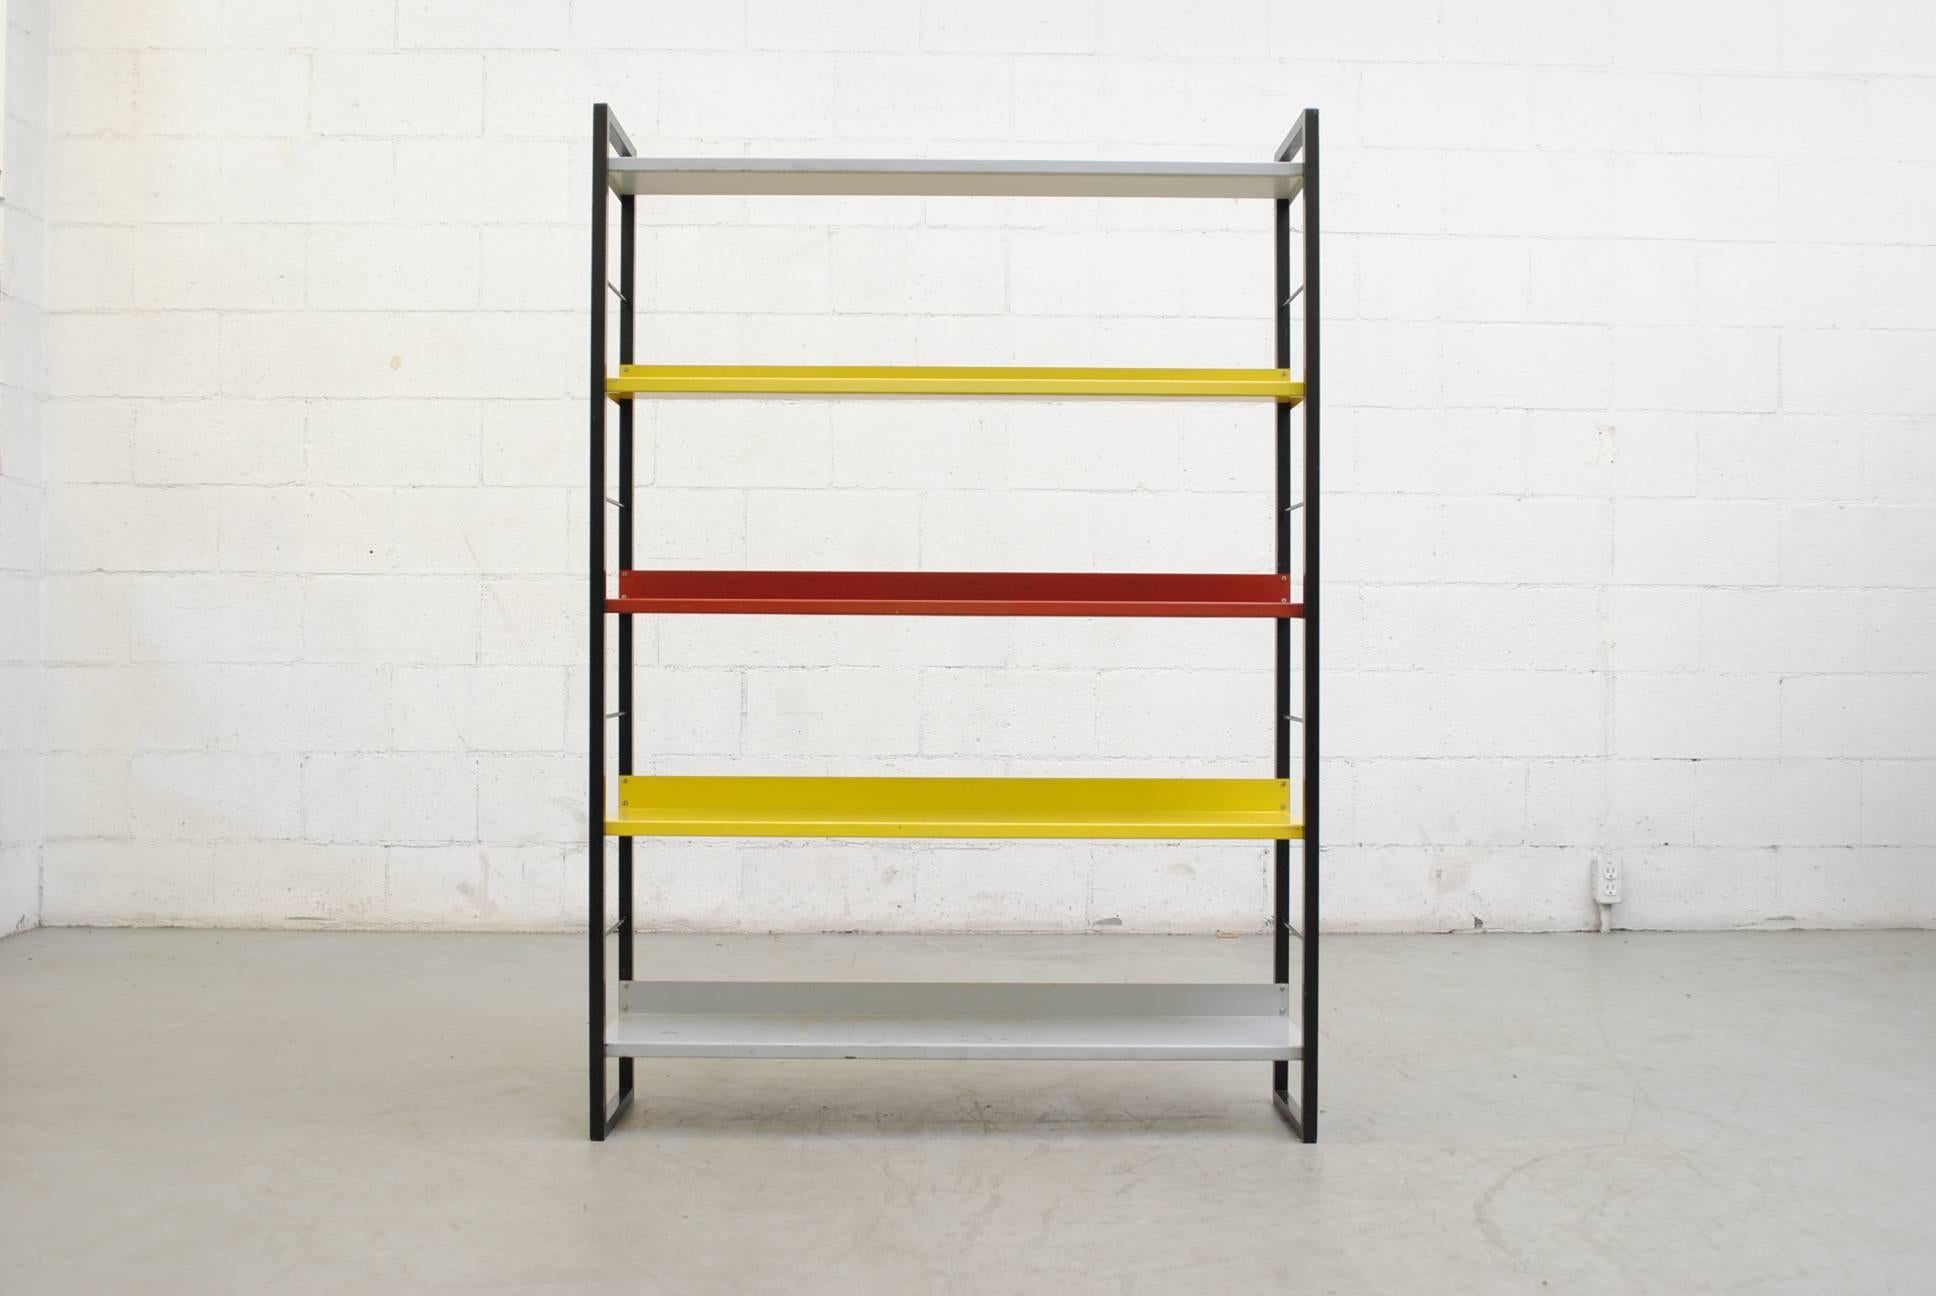 Bauhaus inspired Industrial multicolored enameled metal shelving unit with black steel frame and five multicolored shelves. Visible wear and use, some paint loss, in original condition.